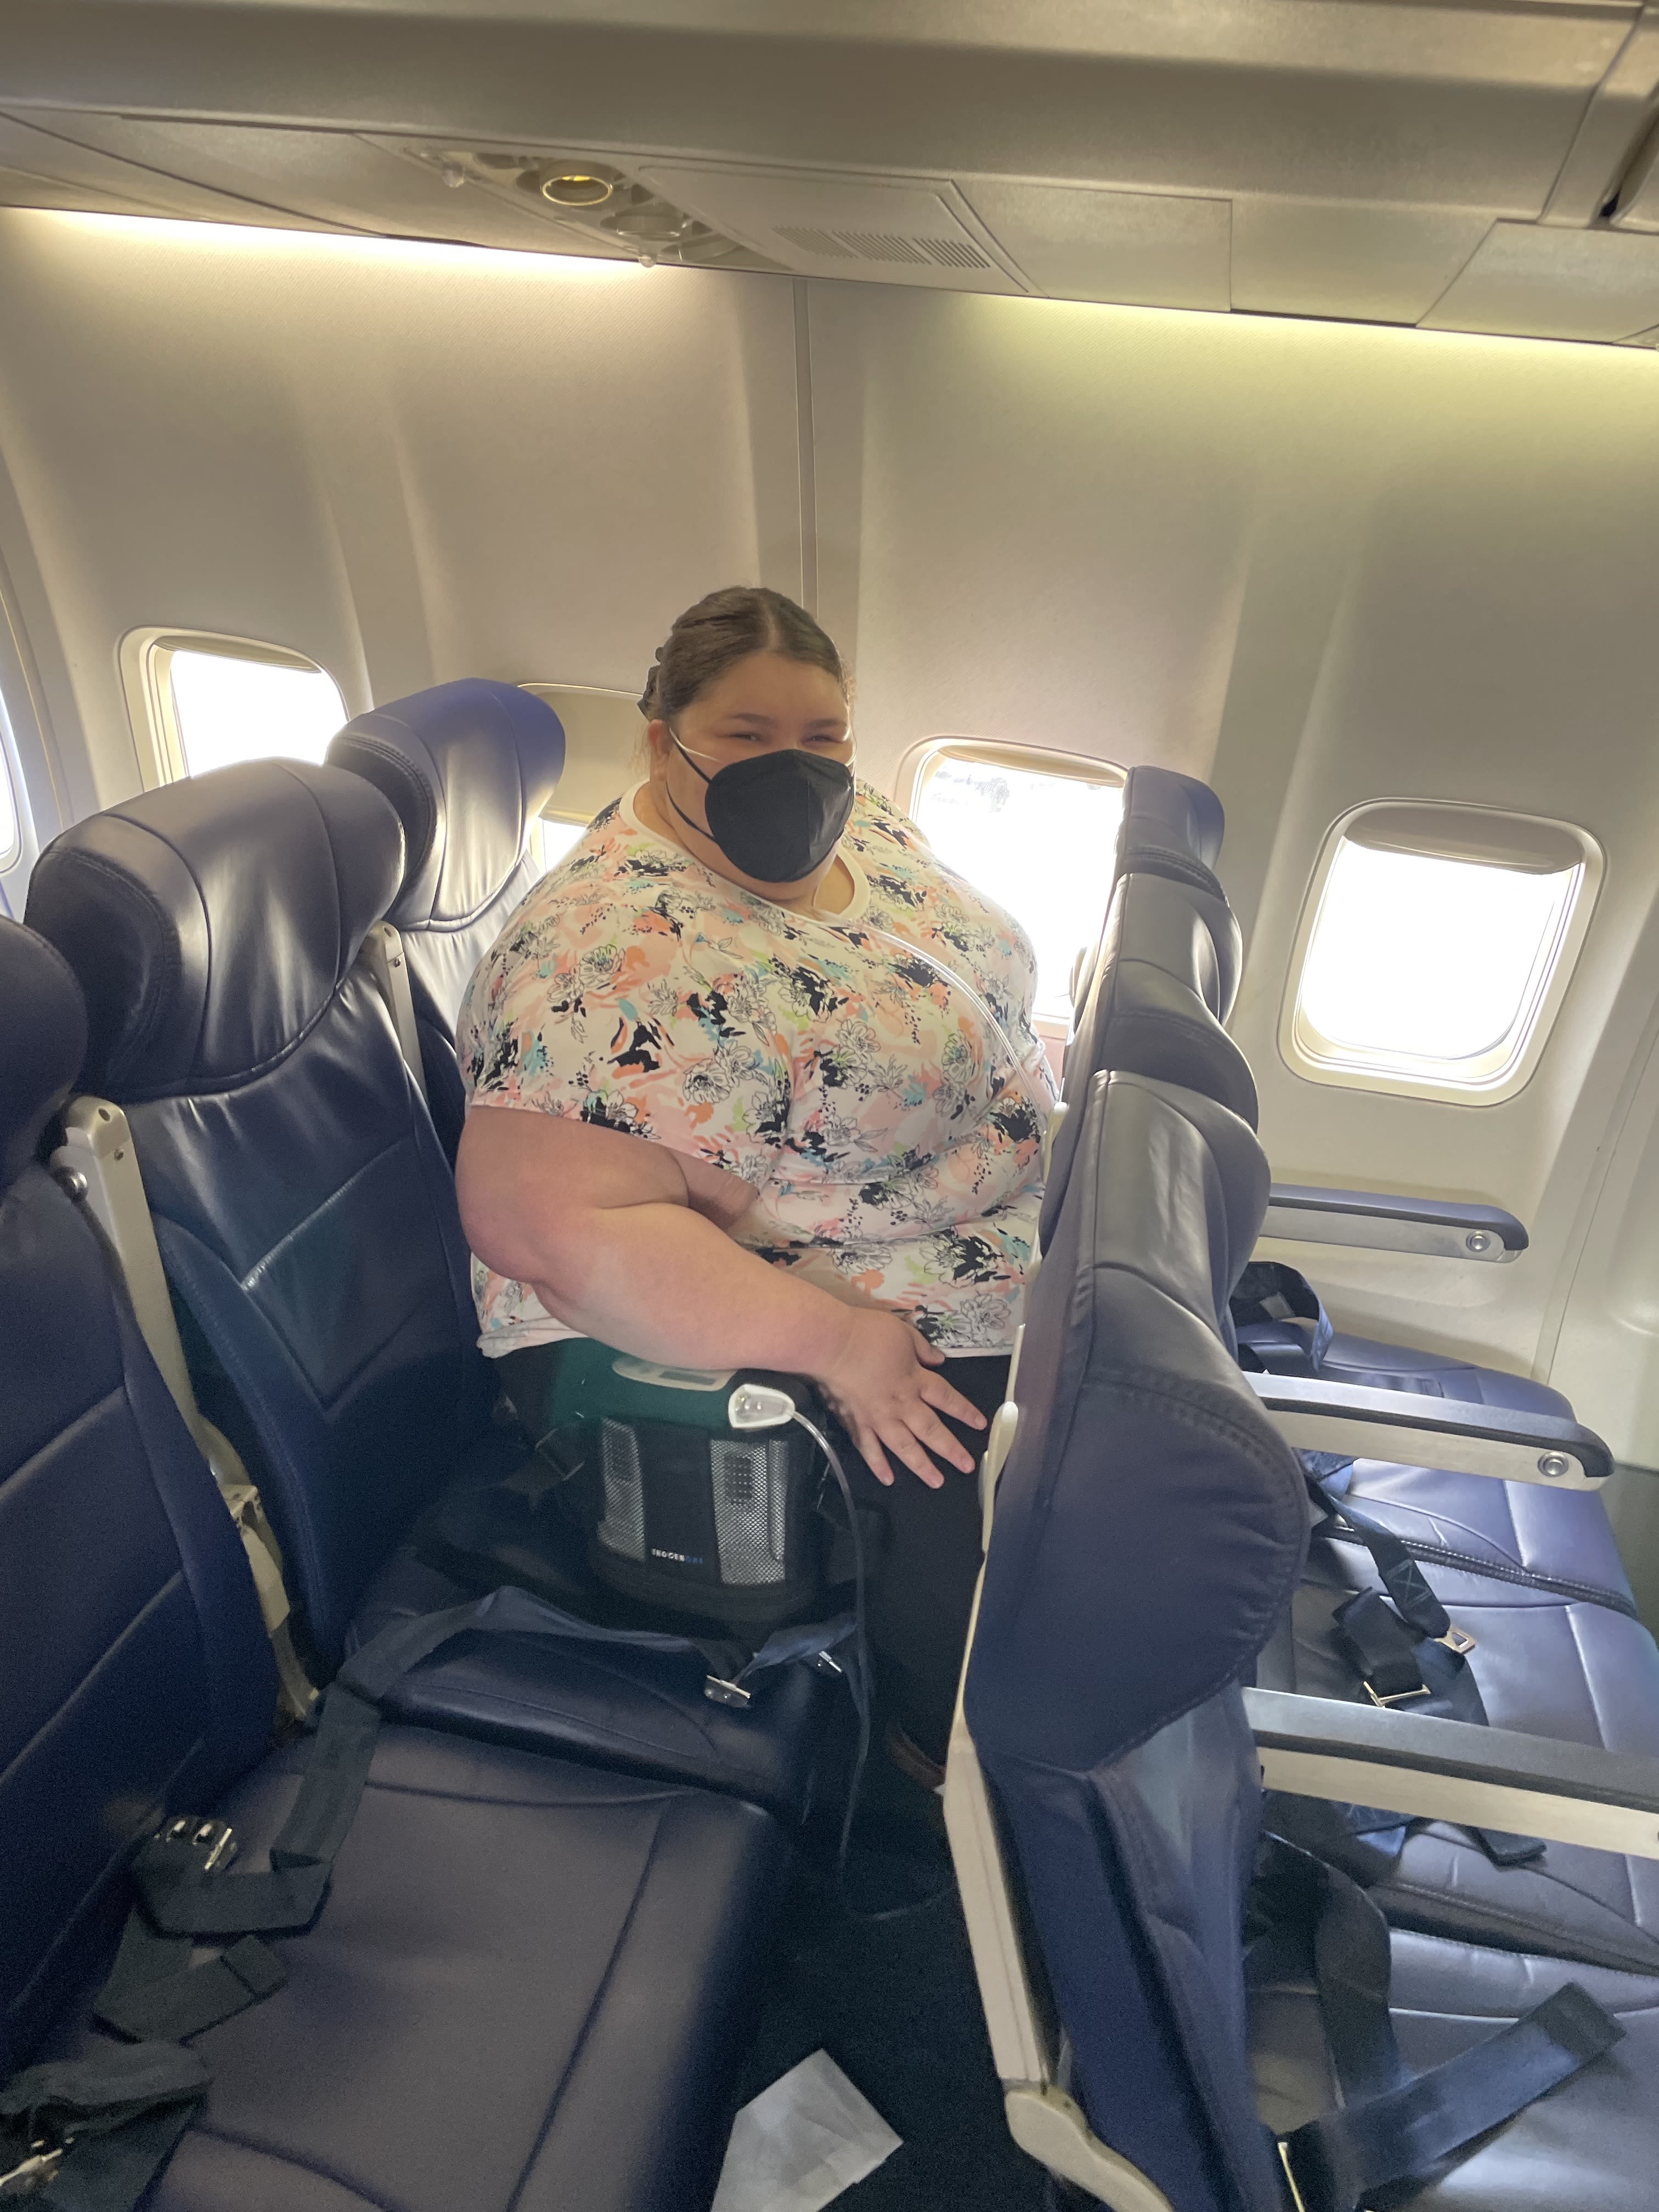 We're paying twice for the same experience': Plus-size travelers hit out at  'discriminatory' airline seat policies